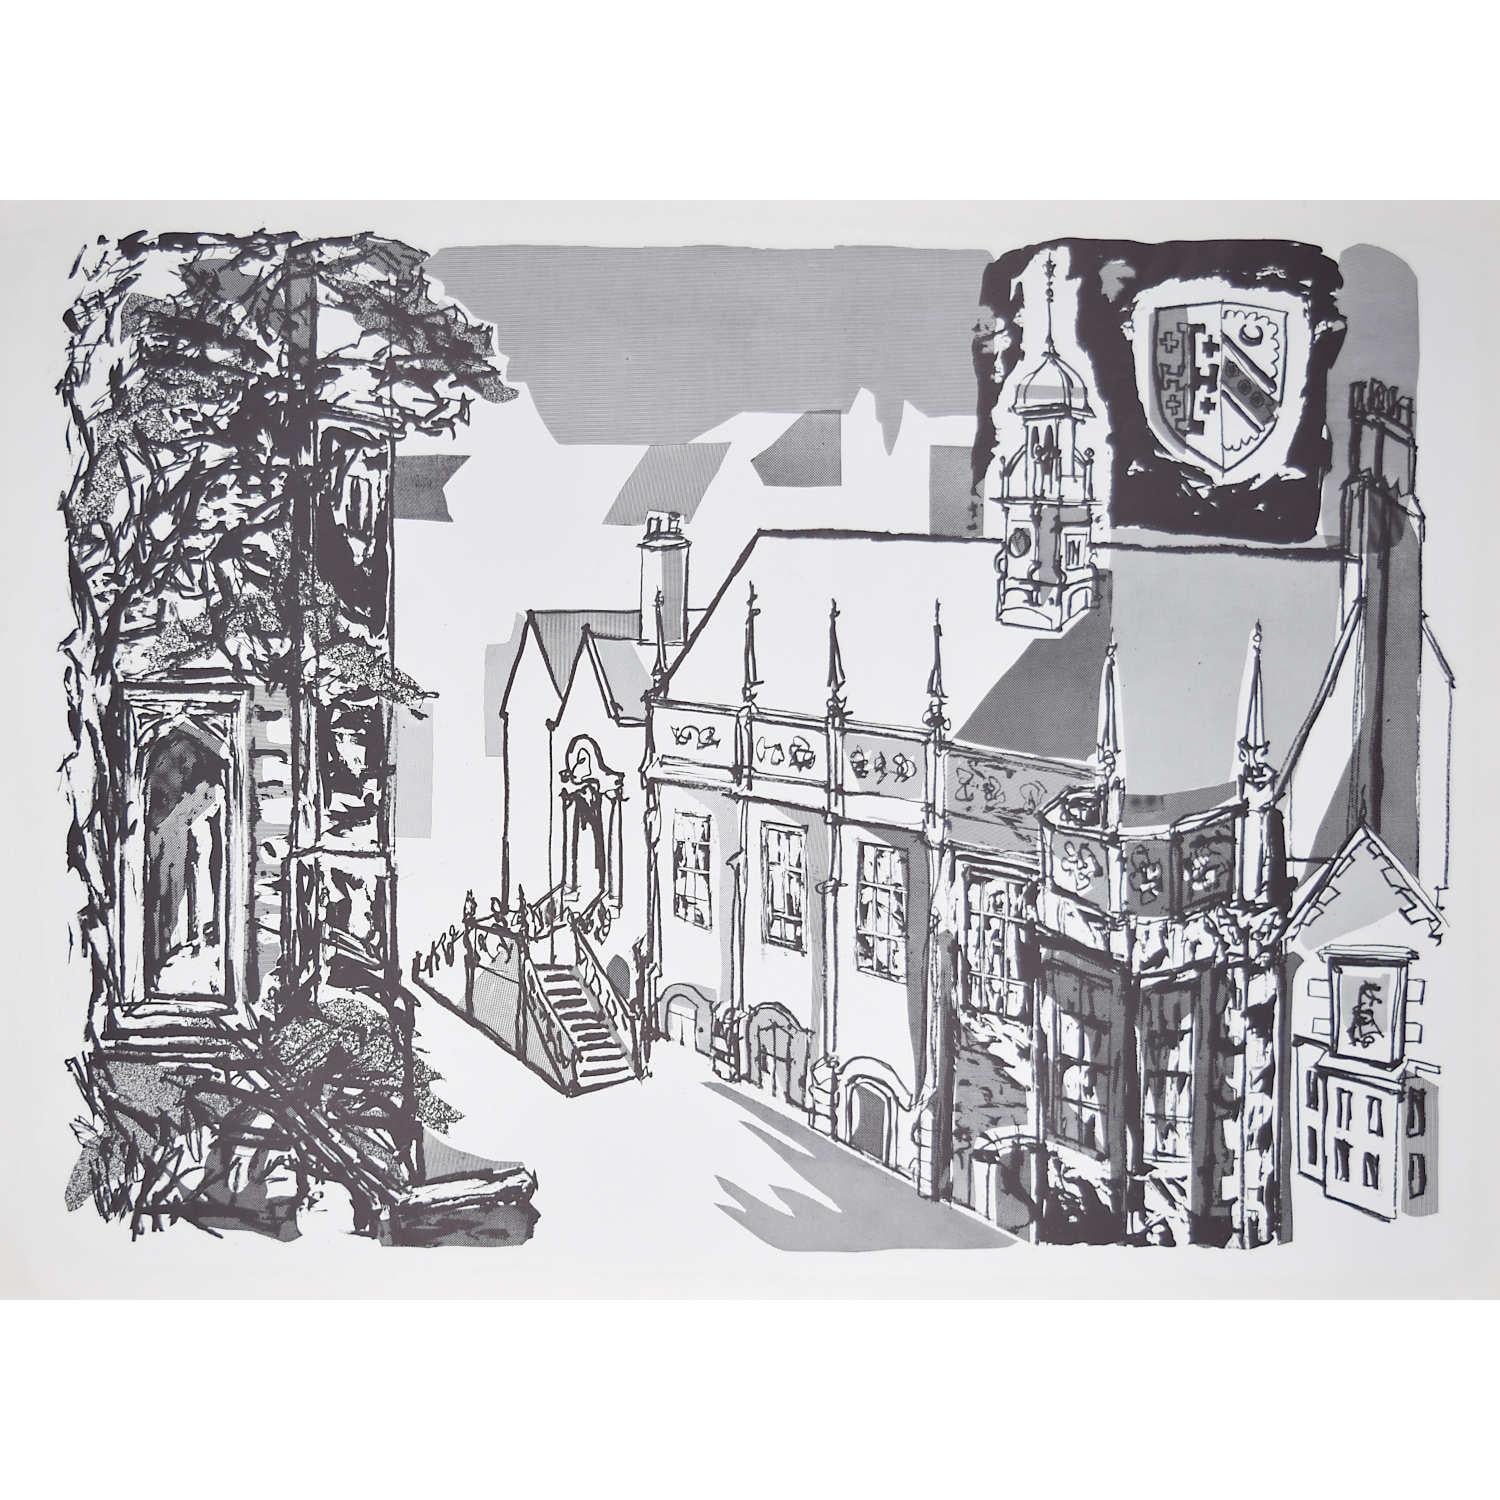 Margaret Souttar (1914-1987)
Selwyn College, Cambridge
Lithograph
77 x 56 cm

Souttar was a Scottish painter and printmaker known for her images of town- and cityscapes. In the early 1960s, she was commissioned to produce a series of prints of the